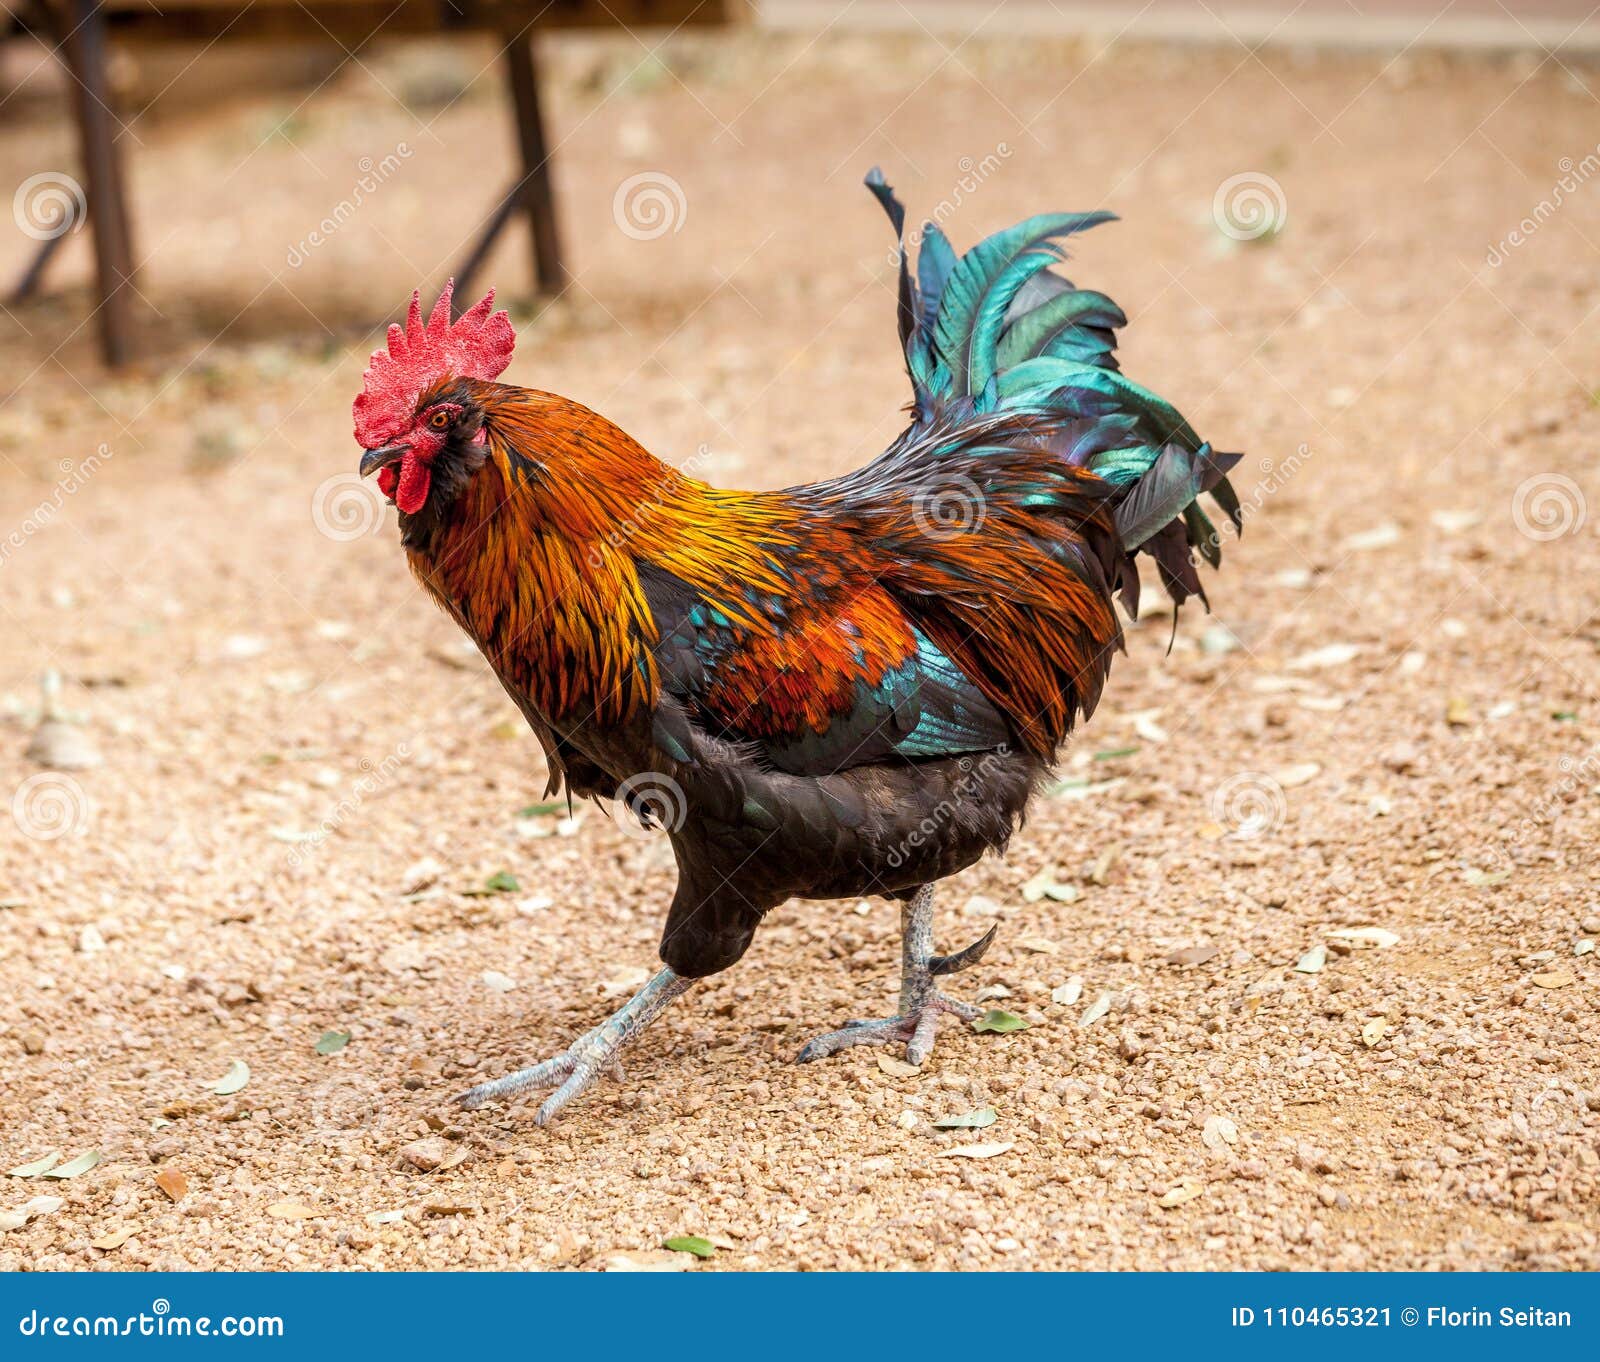 Beautiful Rooster with Red Feathers and Green Tail Stock Image